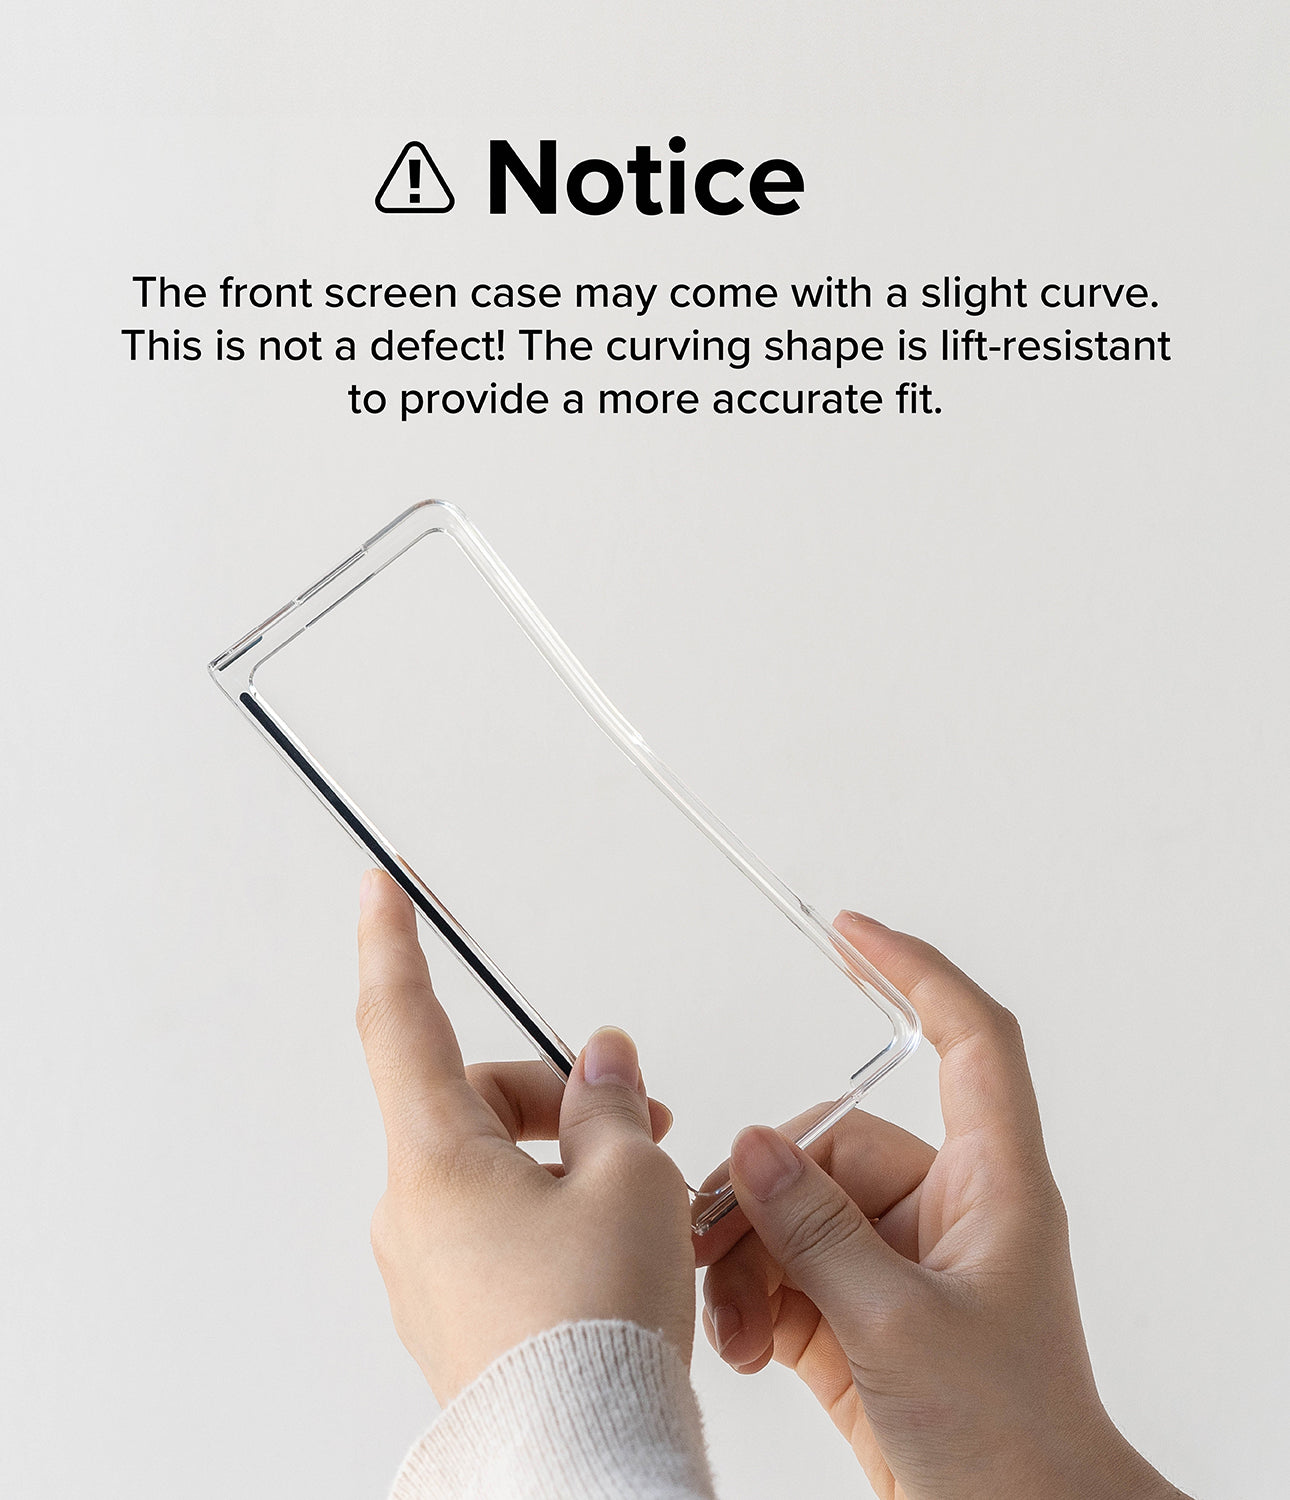 Galaxy Z Fold 5 Case | Slim Hinge - Notice. The front screen case may come with a slight curve. This is not a defect! The curving shape is lift-resistant to provide a more accurate fit.